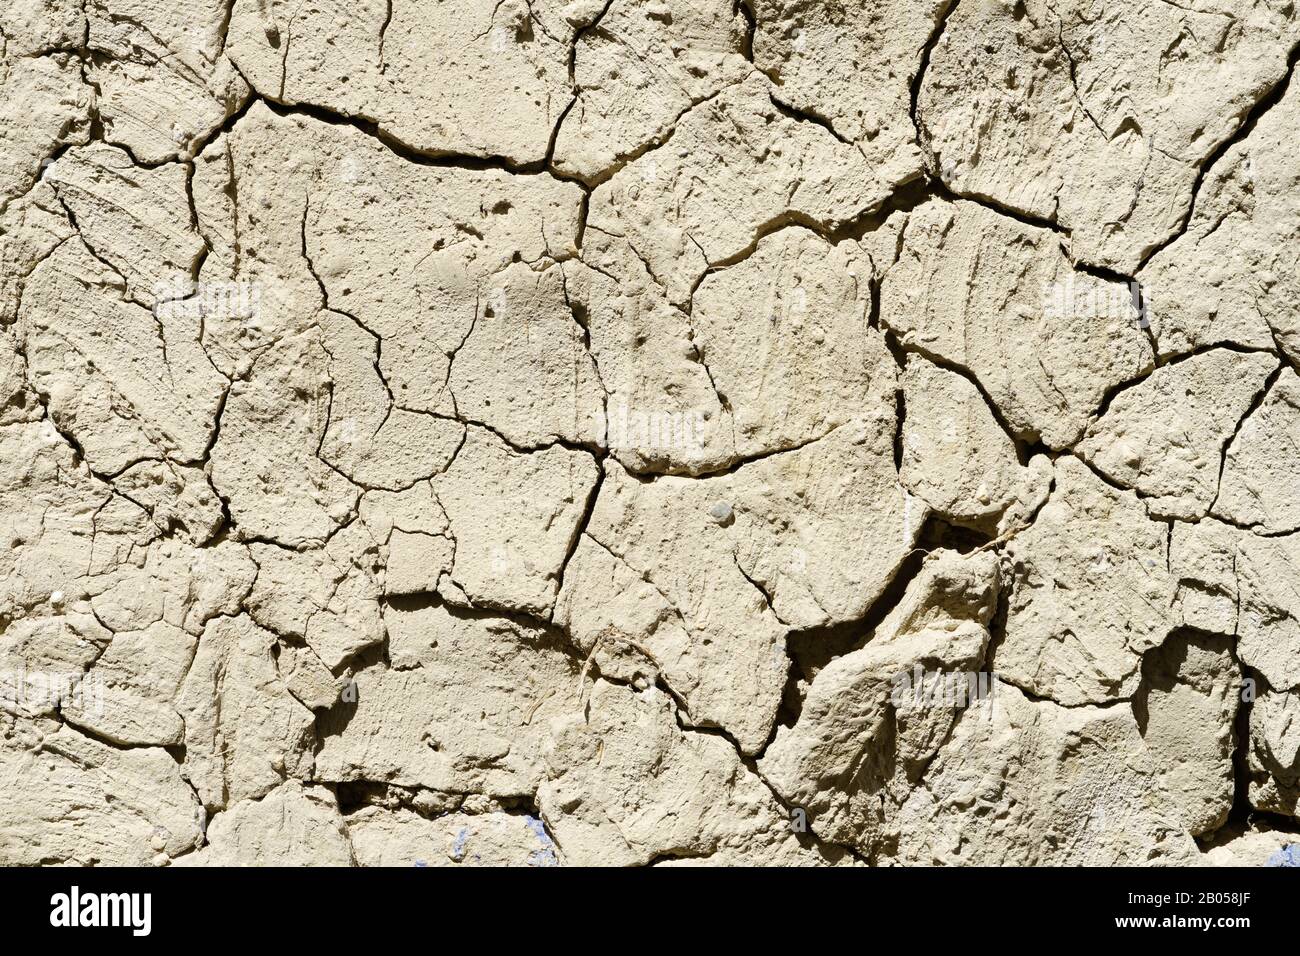 Dry and cracked muddy soil surface, Upper Mustang region, Nepal. Stock Photo